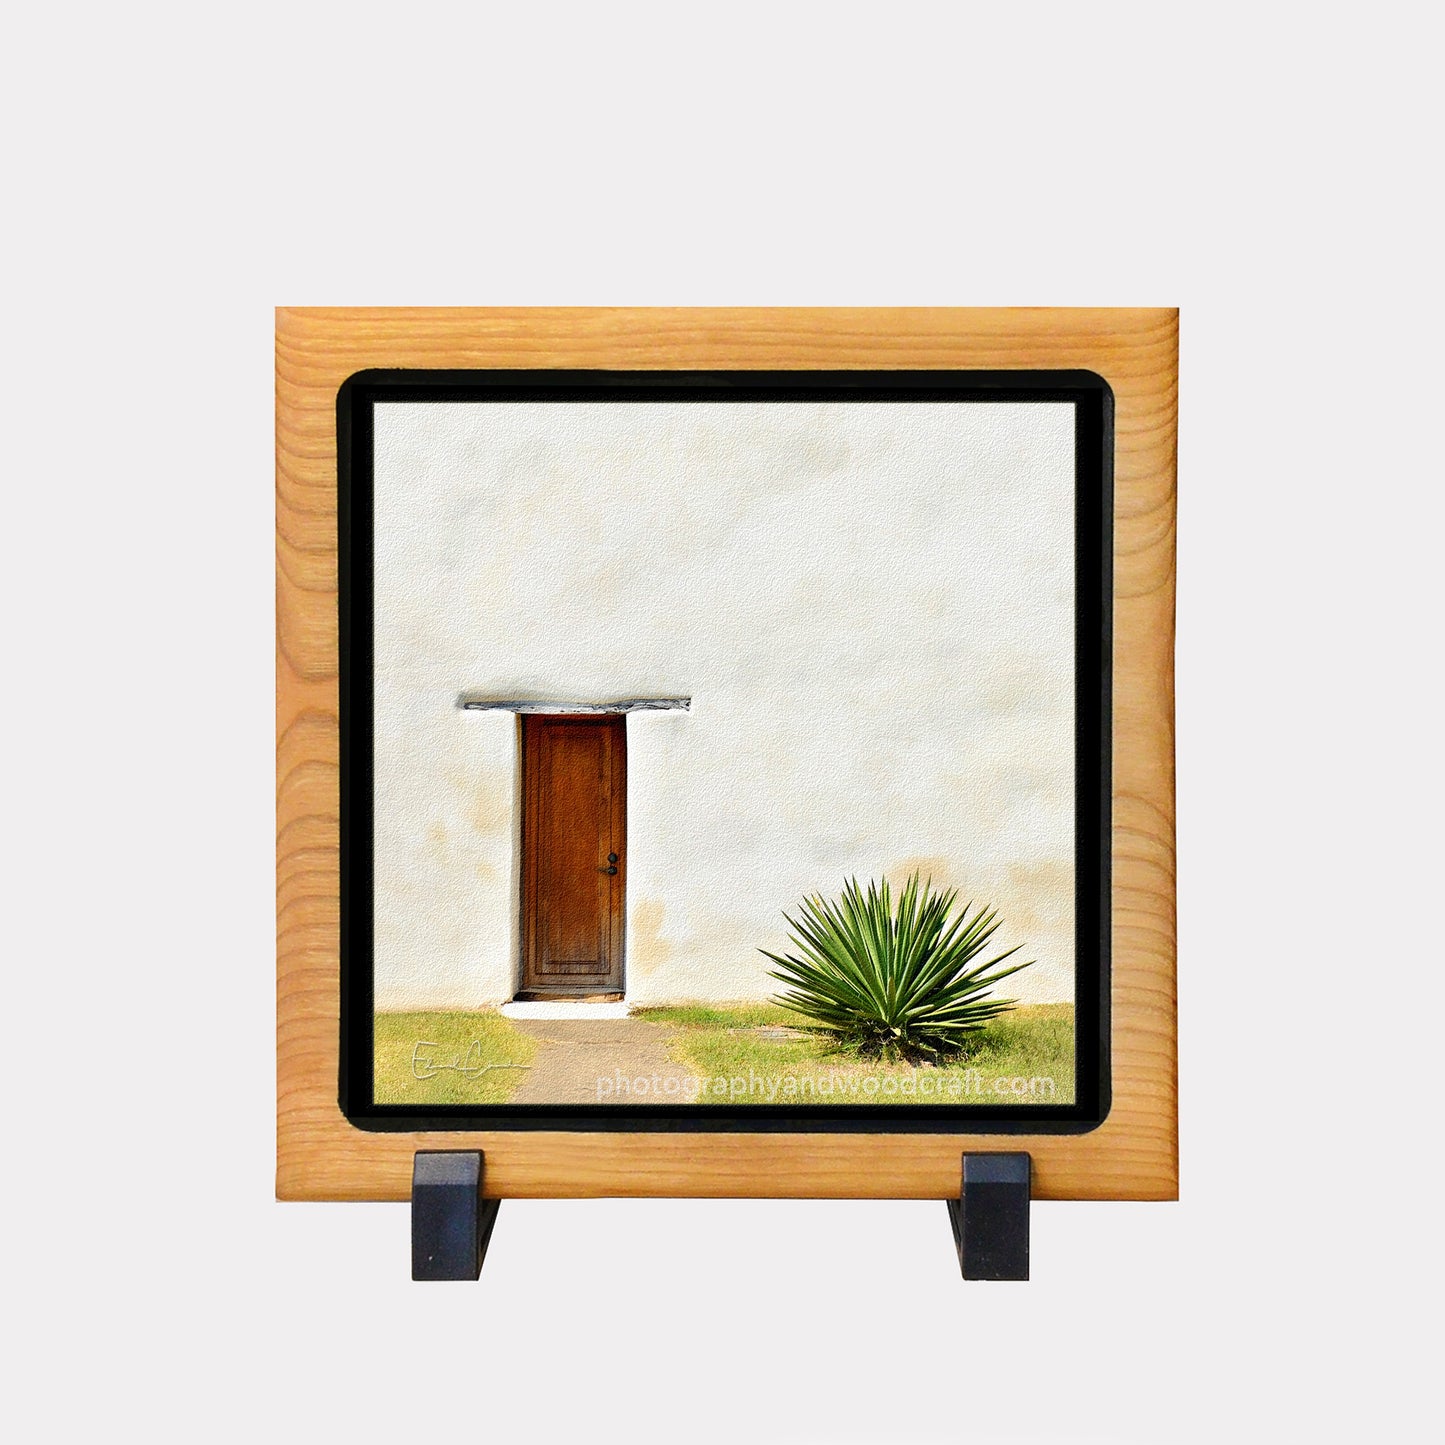 5" x 5" Door with Yucca. Canvas Print in Solid Wood Floating Frame